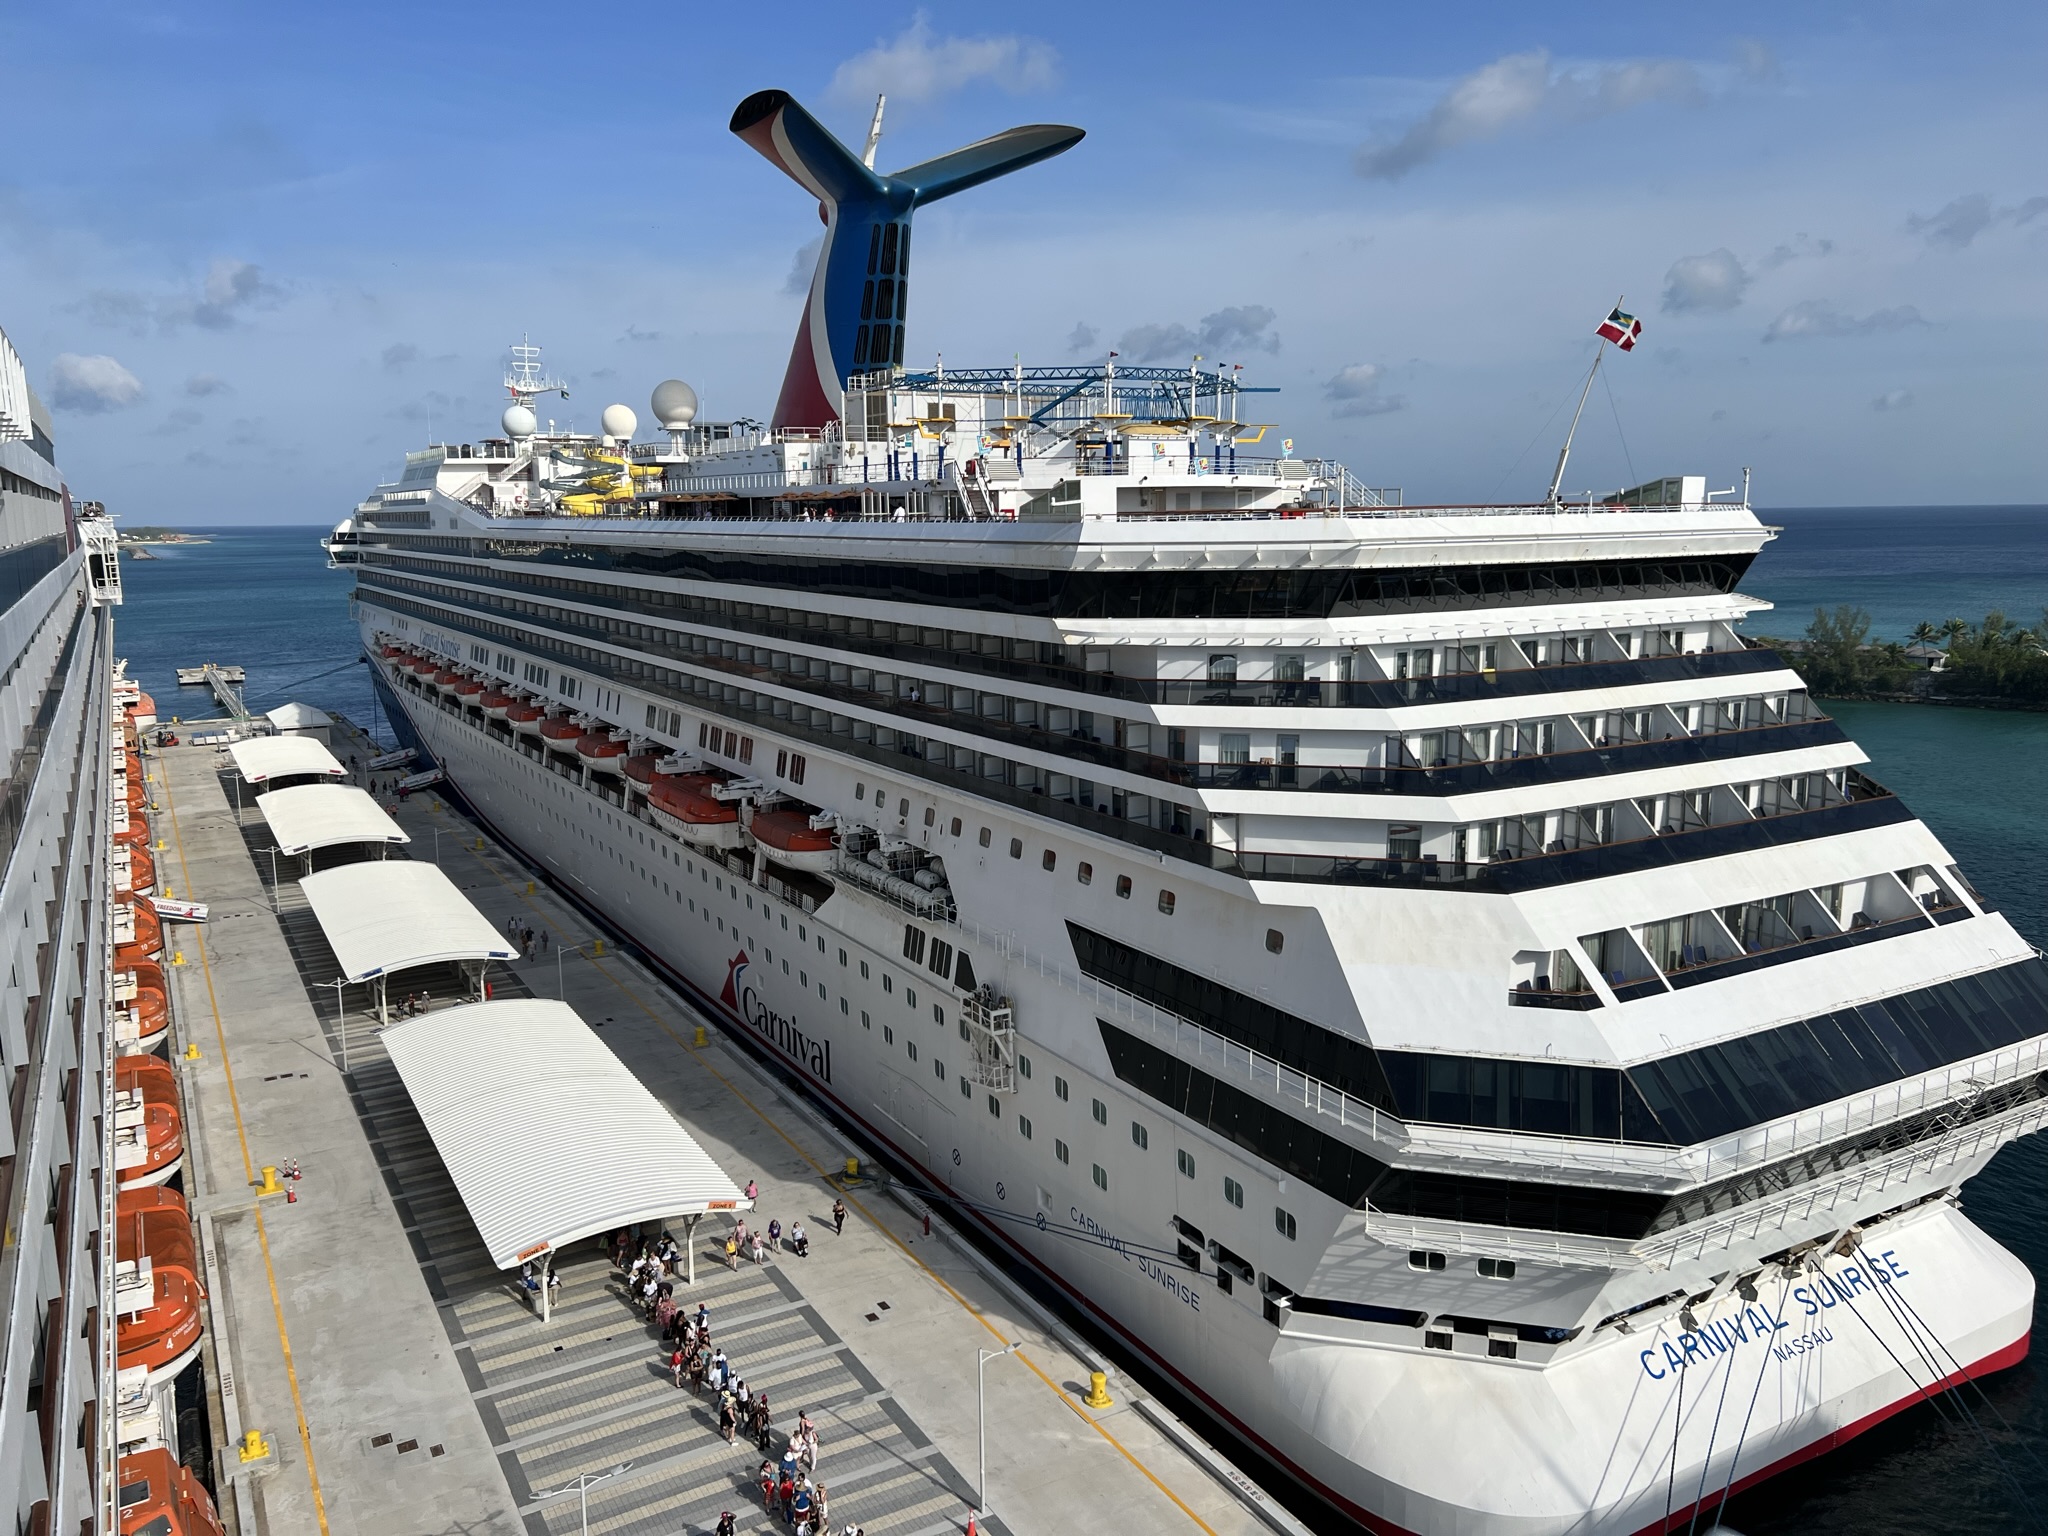 Cruise Ships – Cruise Ship Carnival Sunrise Leaves the Port of Nassau Bahamas and Heads Out to Sea